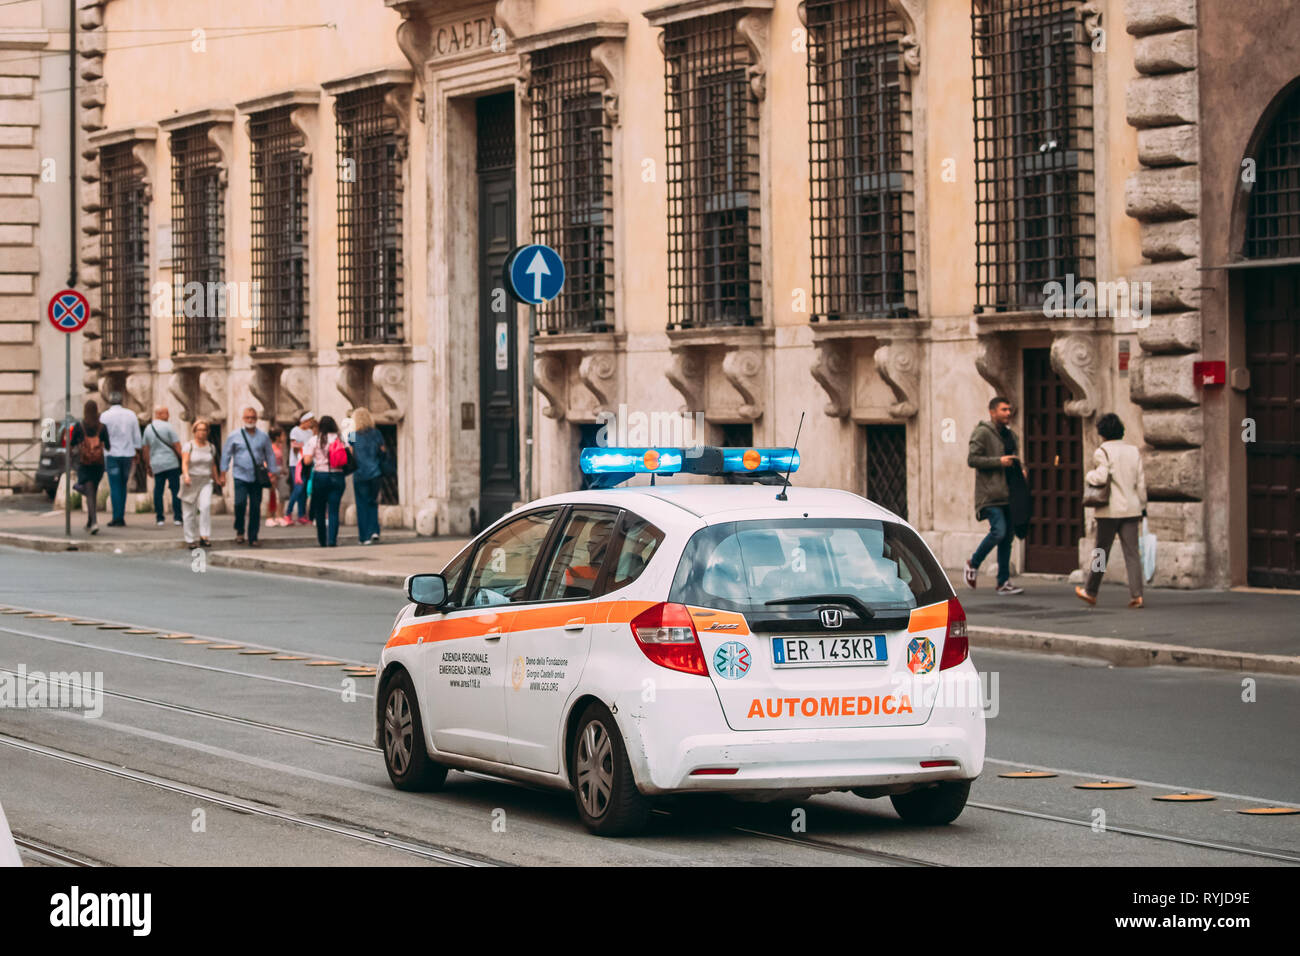 Rome, Italy - October 21, 2018: Moving With Siren Emergency Ambulance Small Honda Car On Street. Emergency Lights System Els Activated Stock Photo